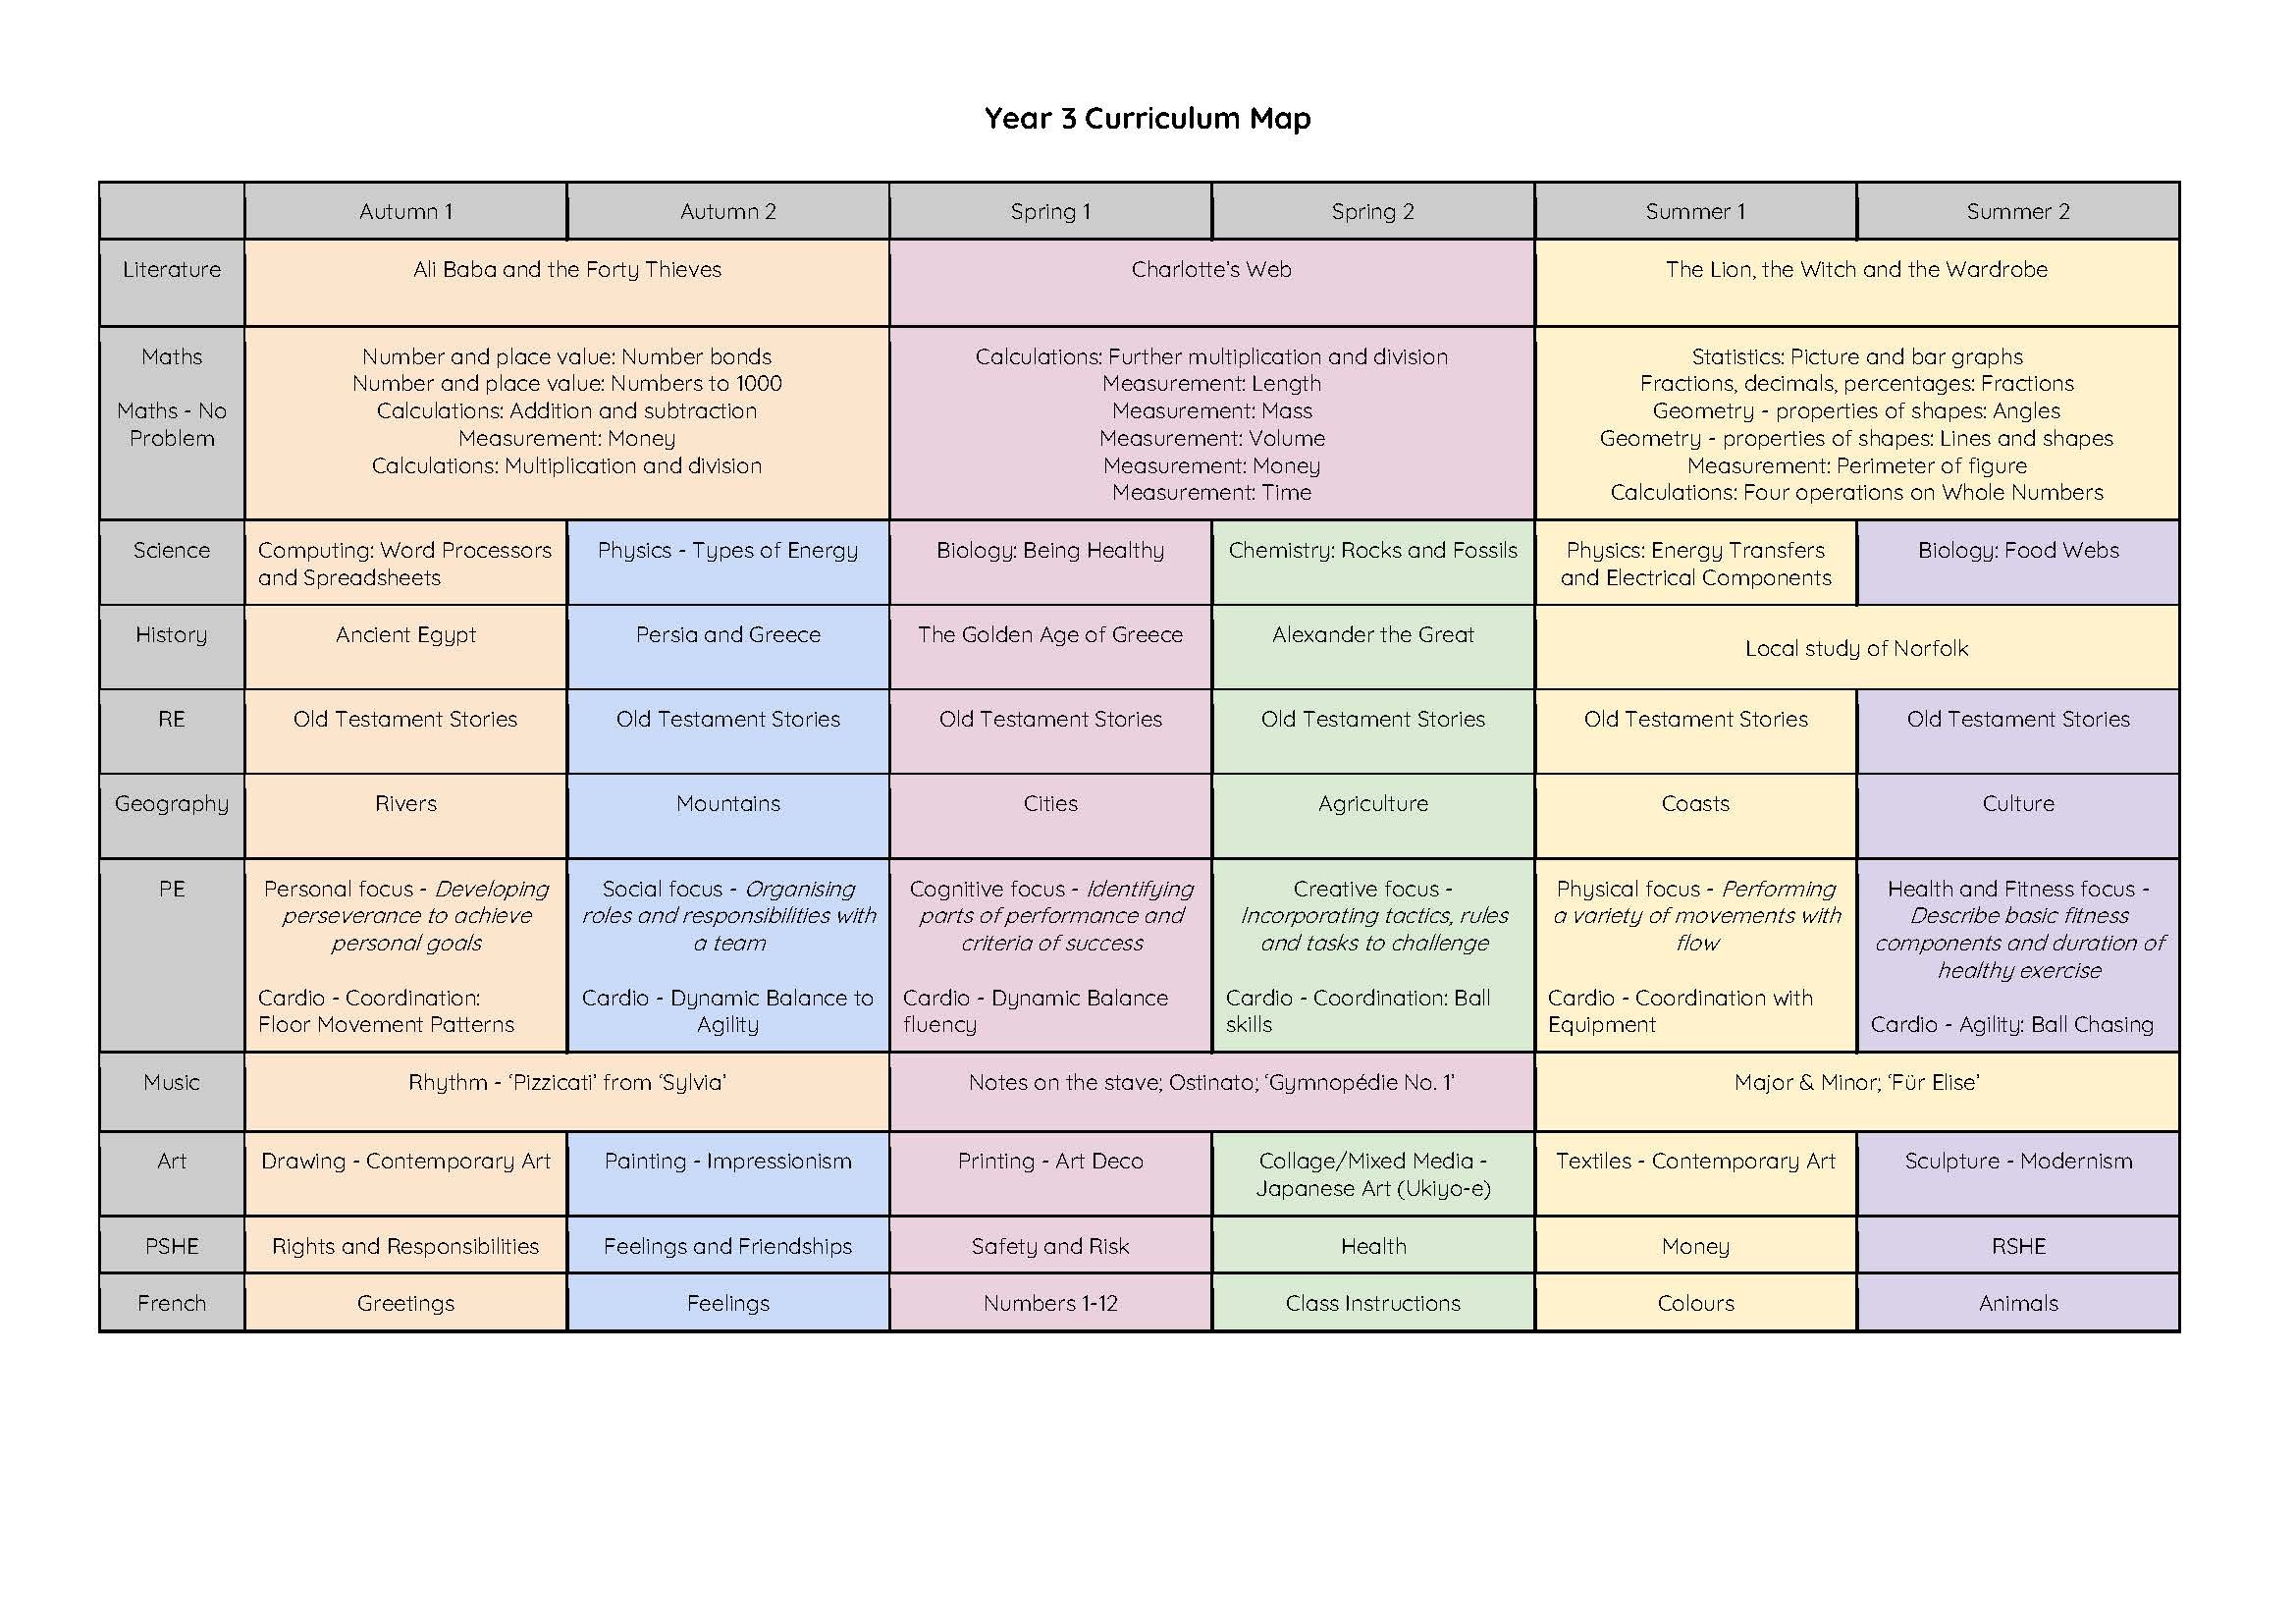 Year 3 Curriculum Overview